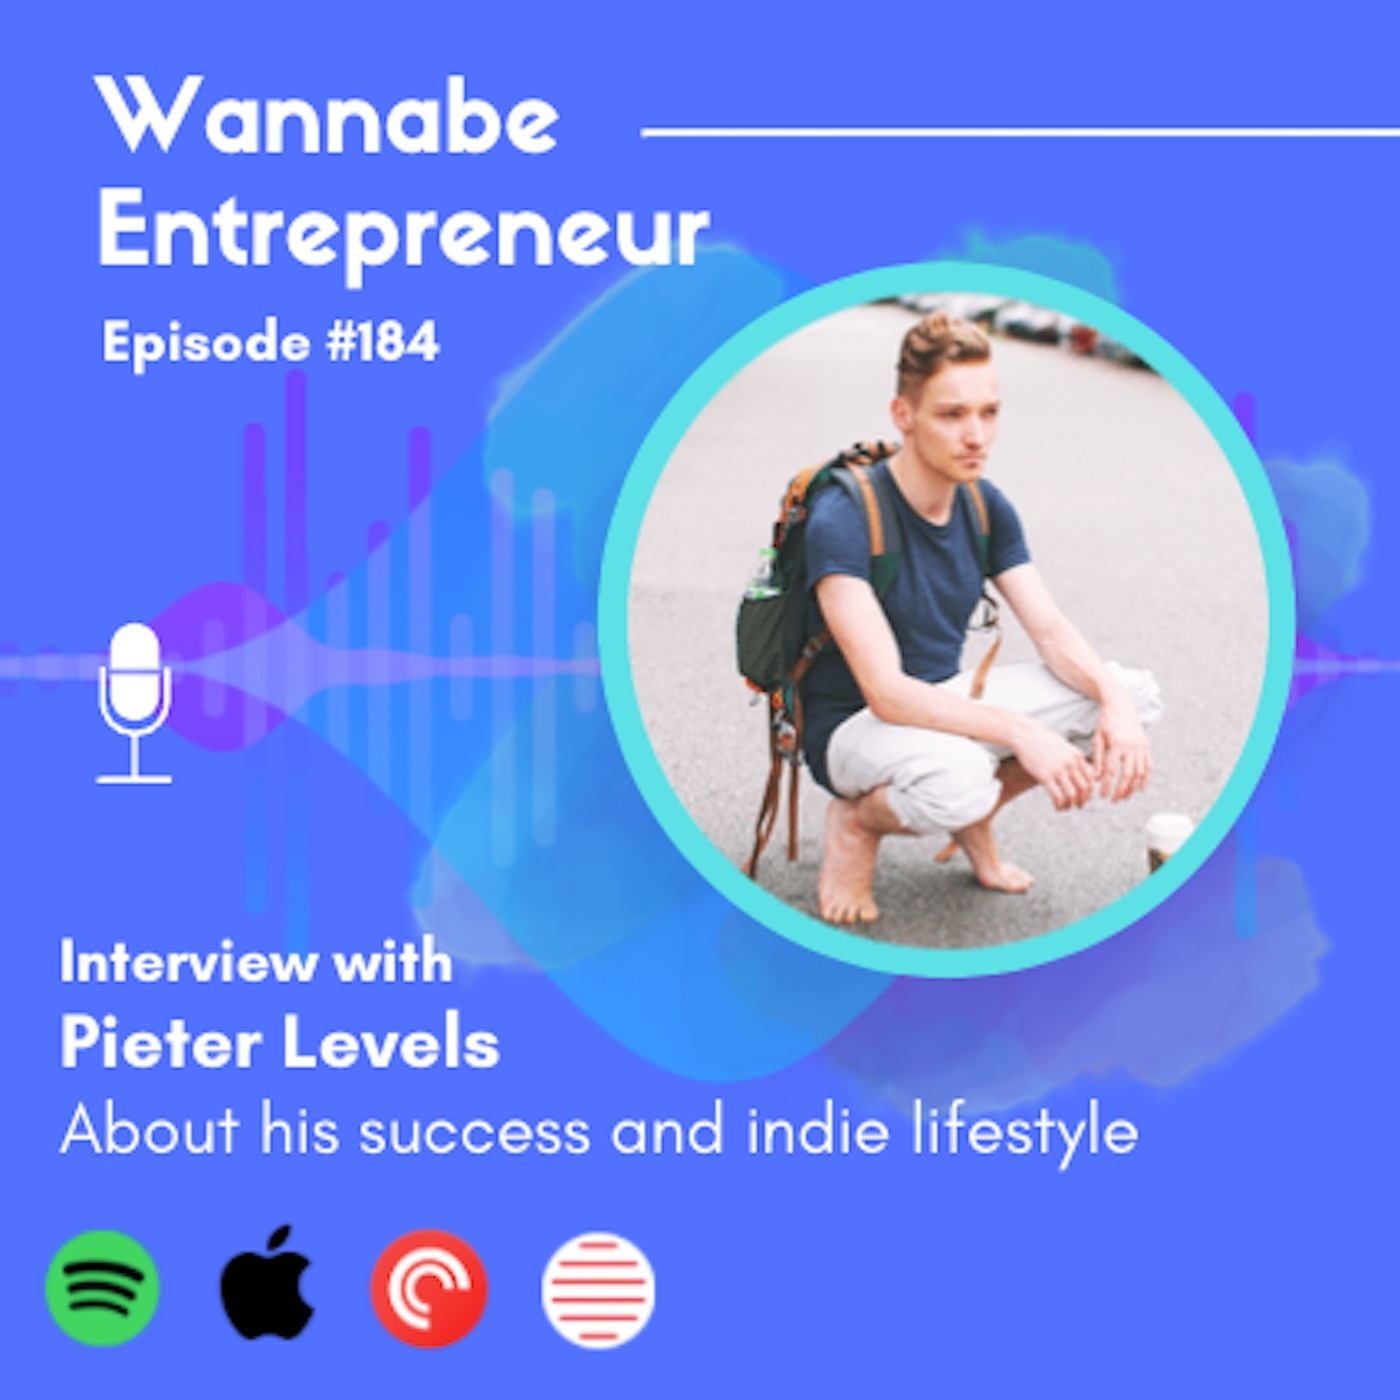 Interviewing Pieter Levels about his Success and Indie Lifestyle